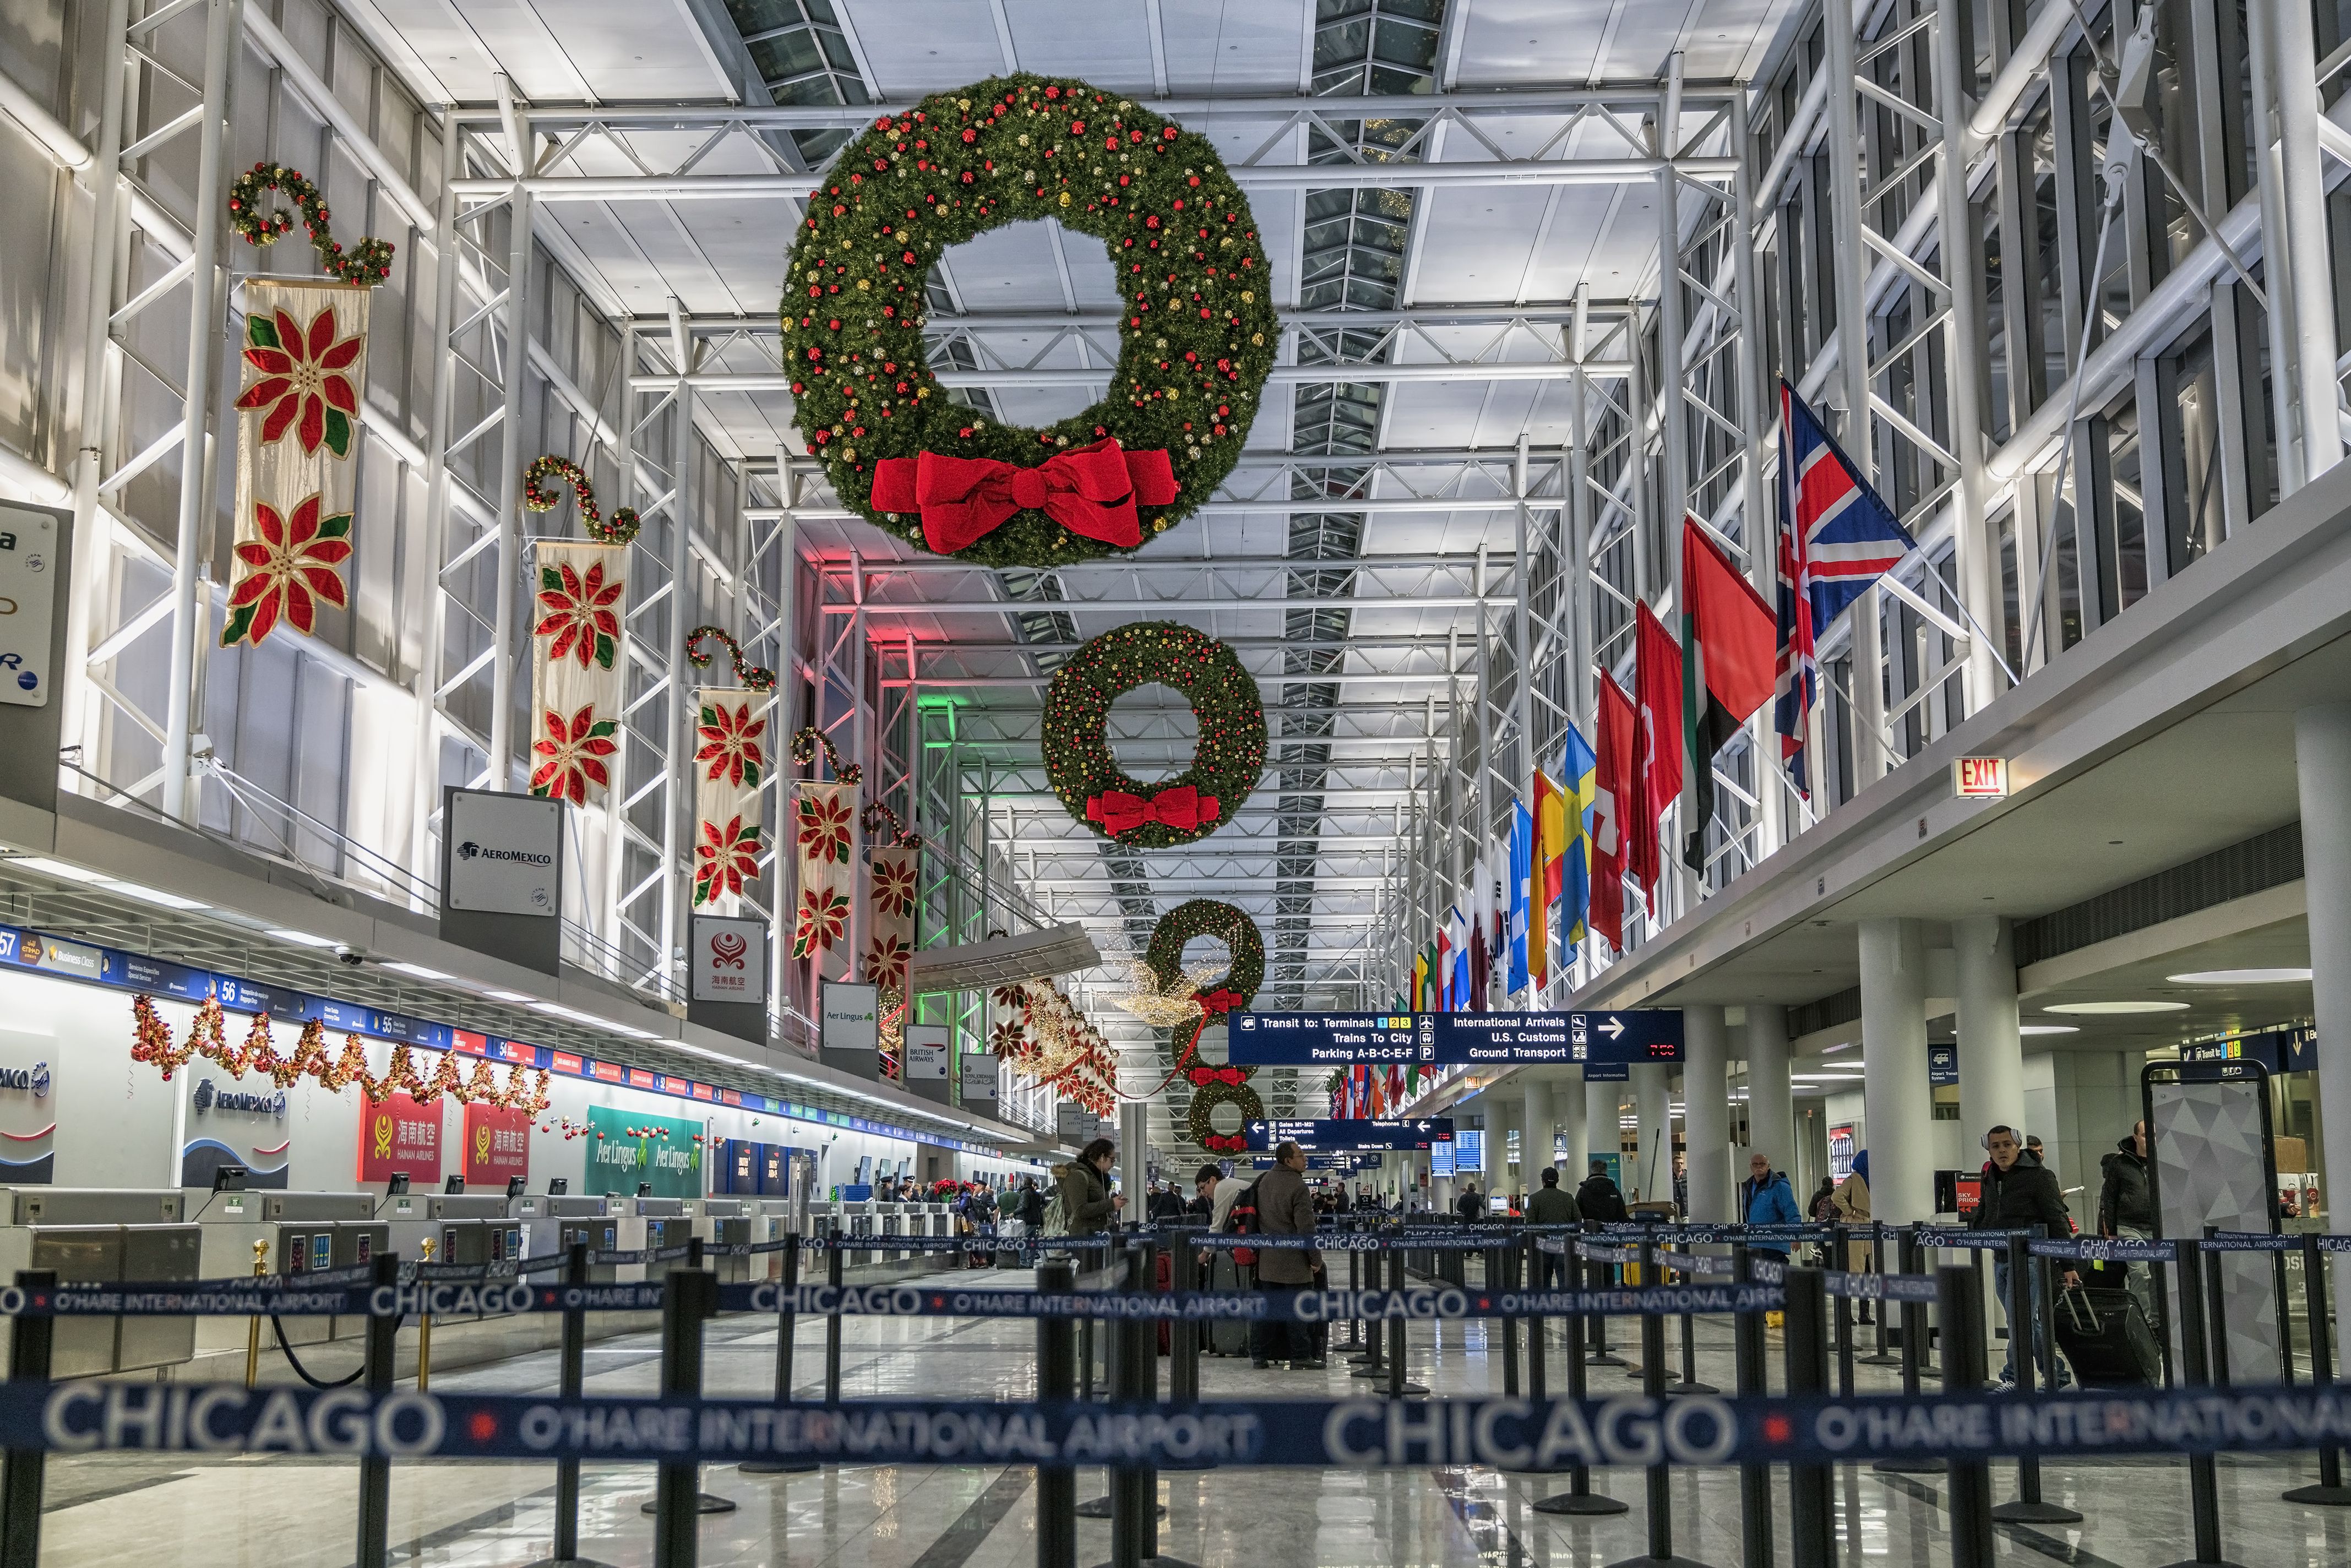 Inside the international terminal of Chicago O'Hare Airport.